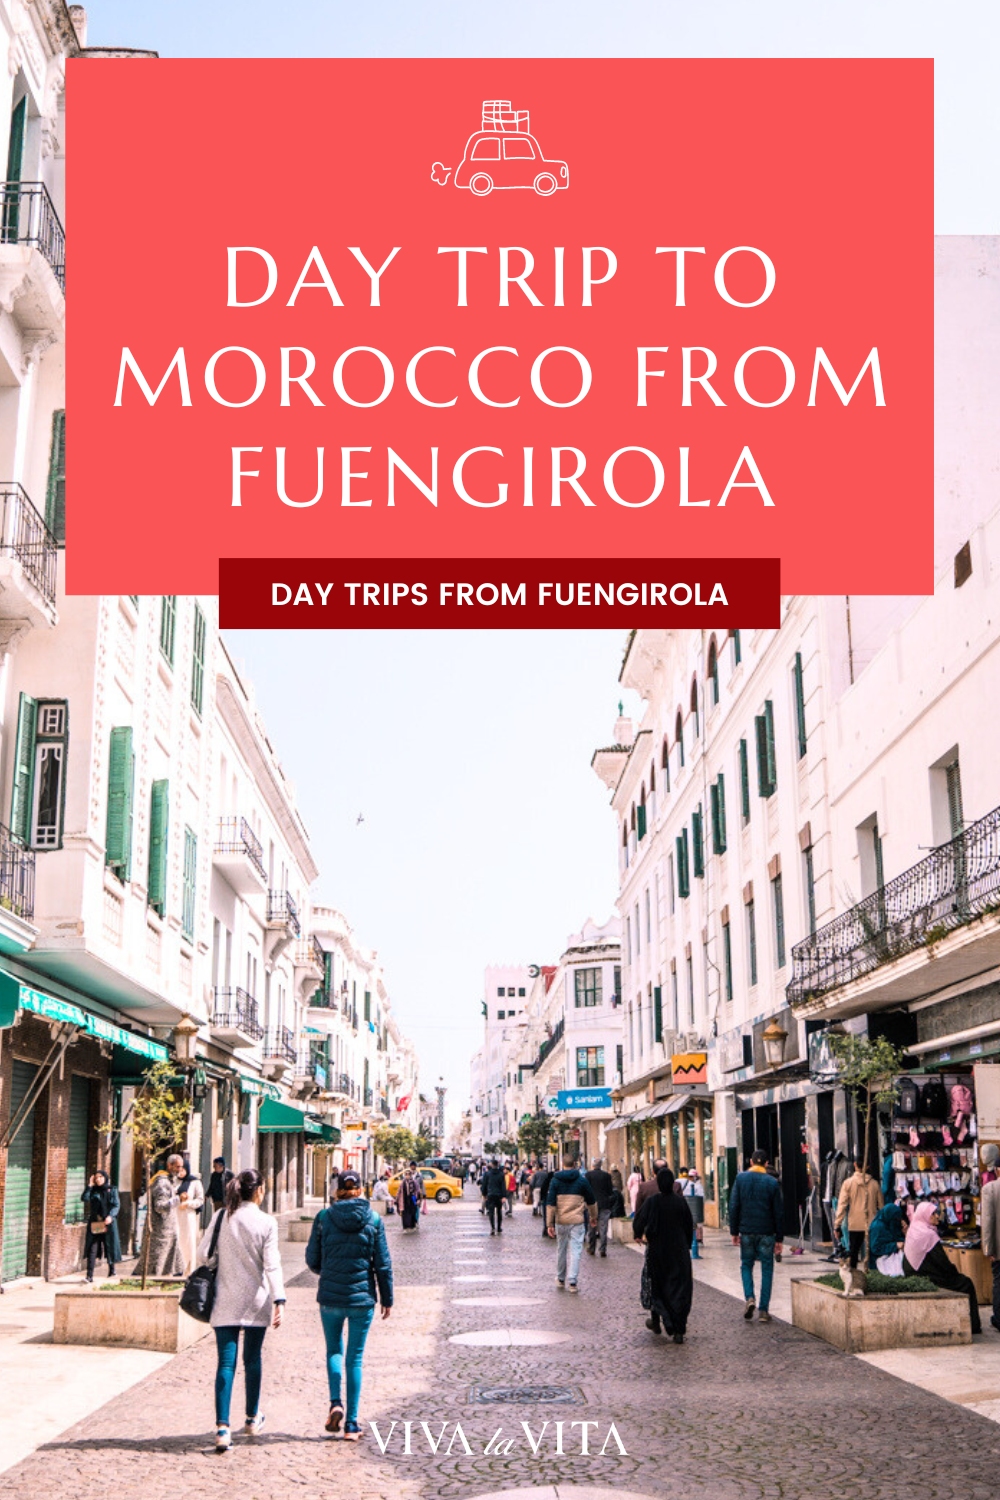 pinterest image showing the city of Tetouan in Morocco, with a headline - day trip to Morocco from Fuengirola, Day trips from Fuengirola